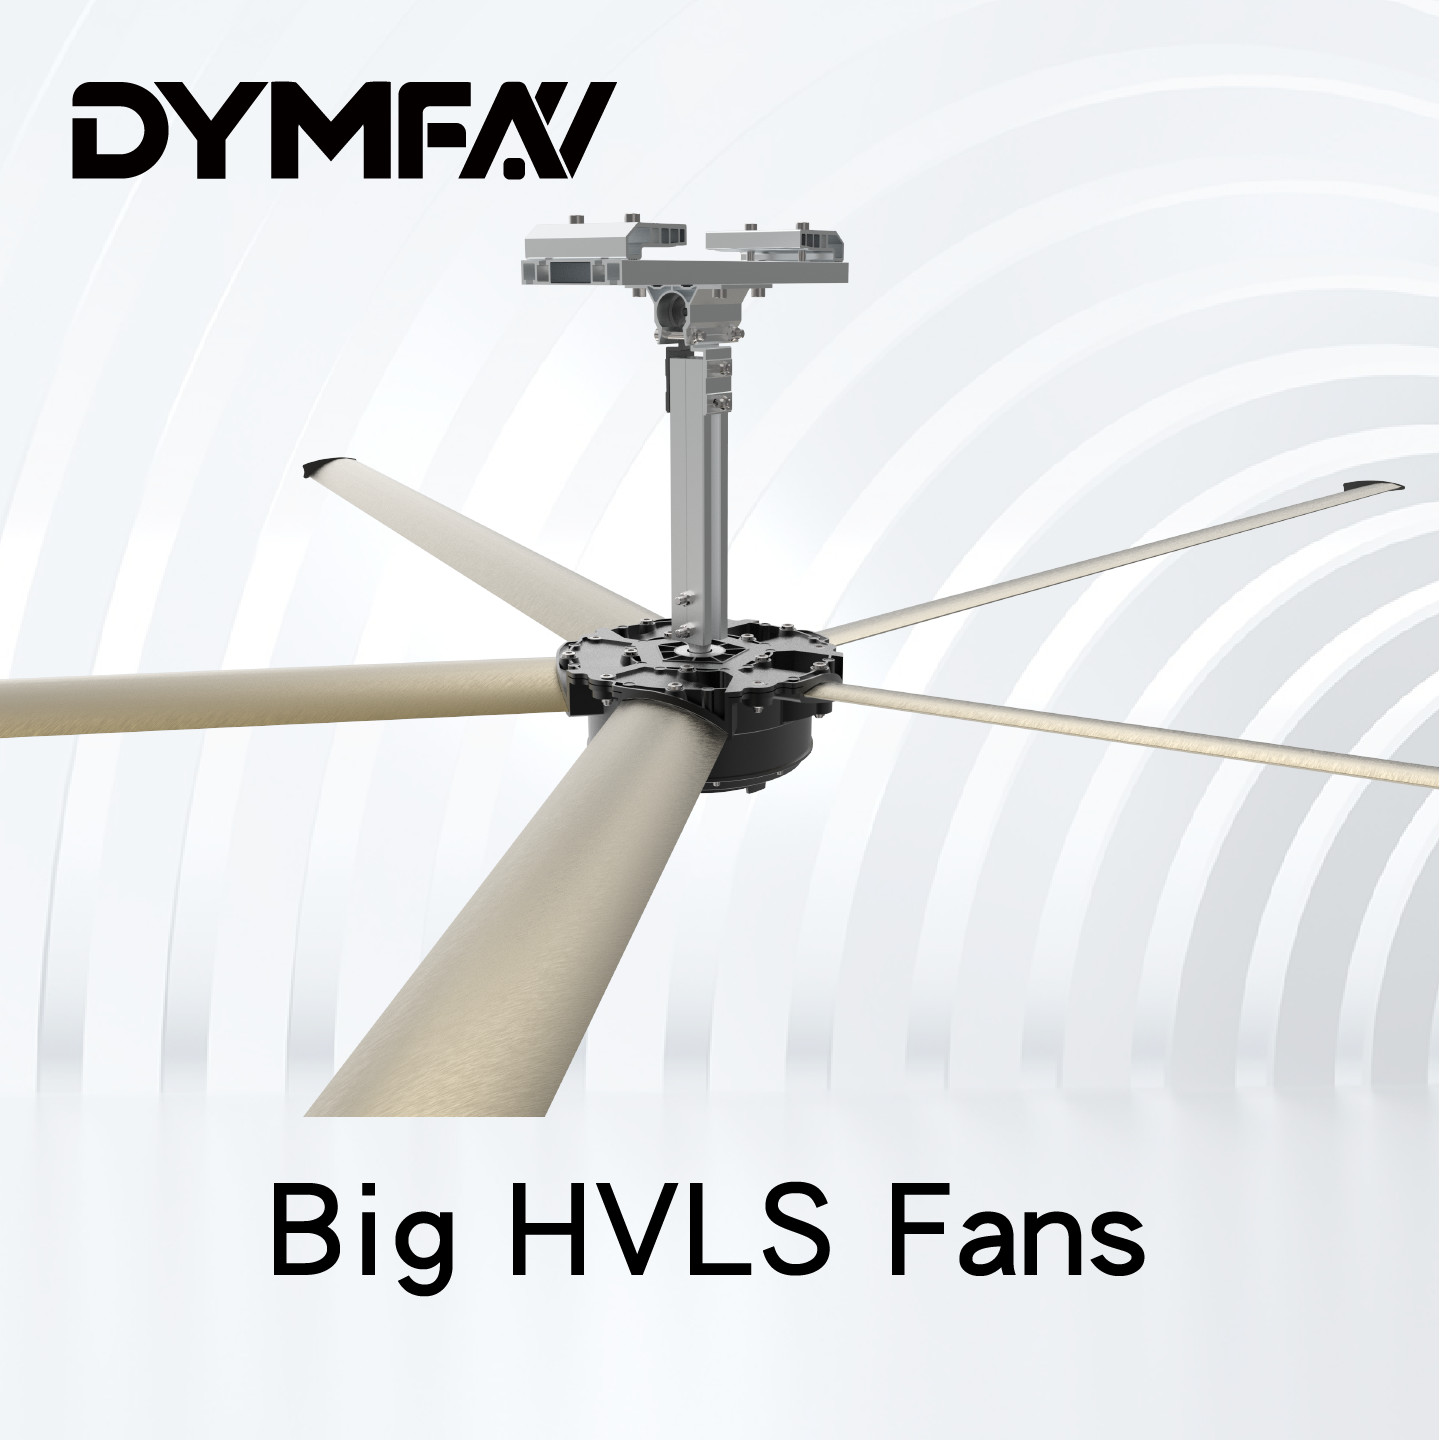 PMSM Commercial Big HVLS Industrial Ceiling Fans For Gyms 5m 0.7kw Energy Saving